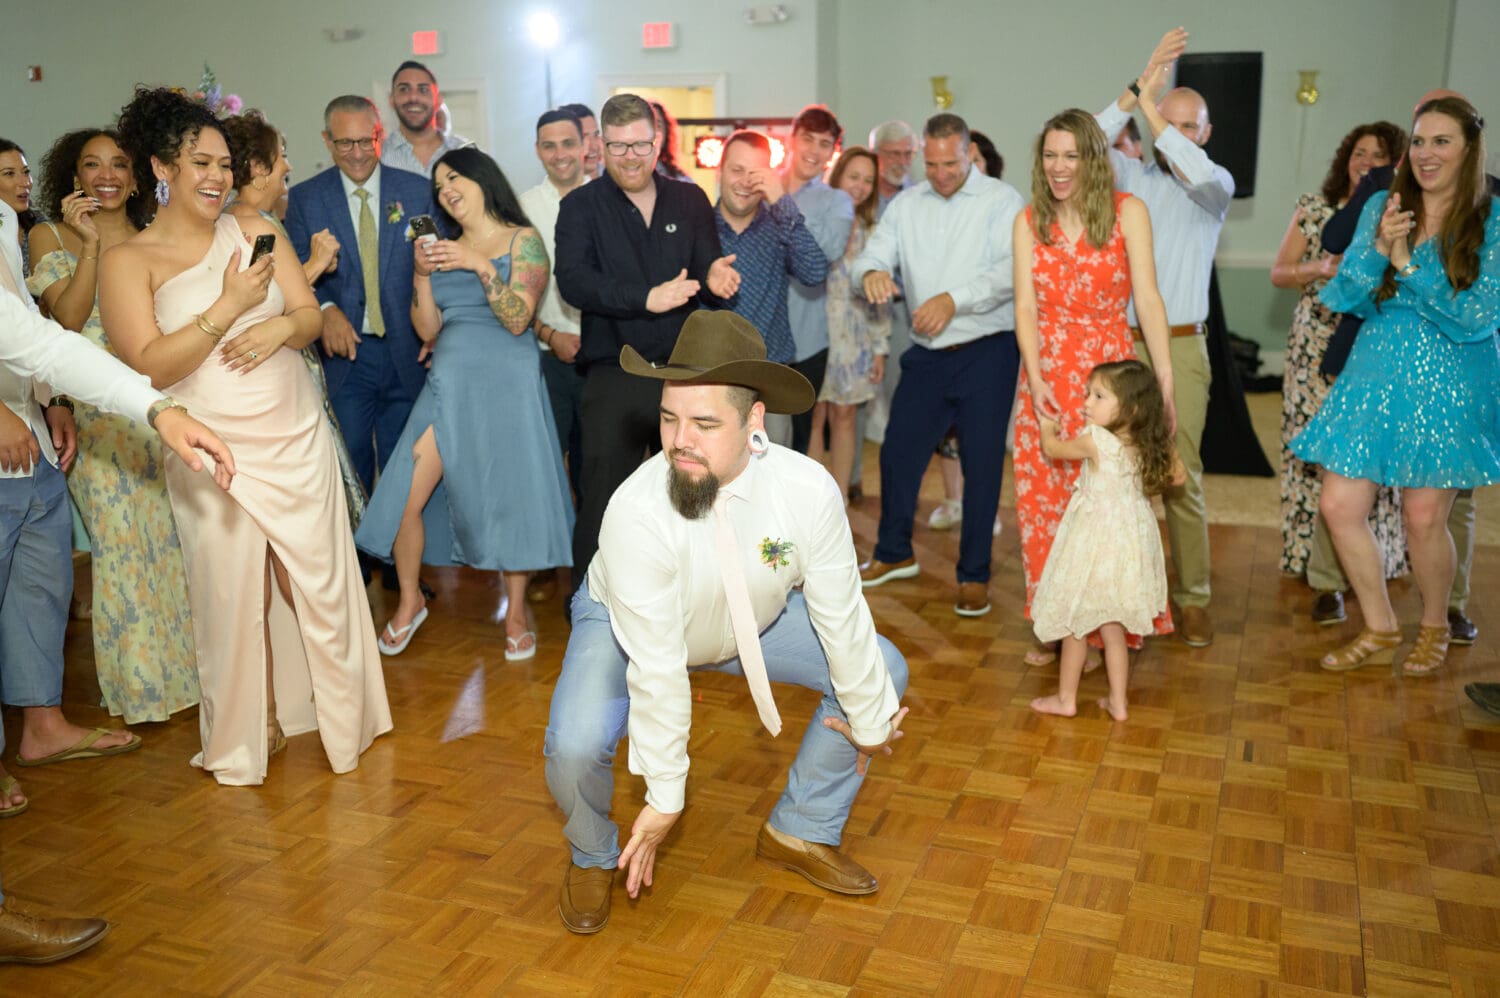 Lots of dancing fun after the first dance - Pawleys Plantation Golf & Country Club